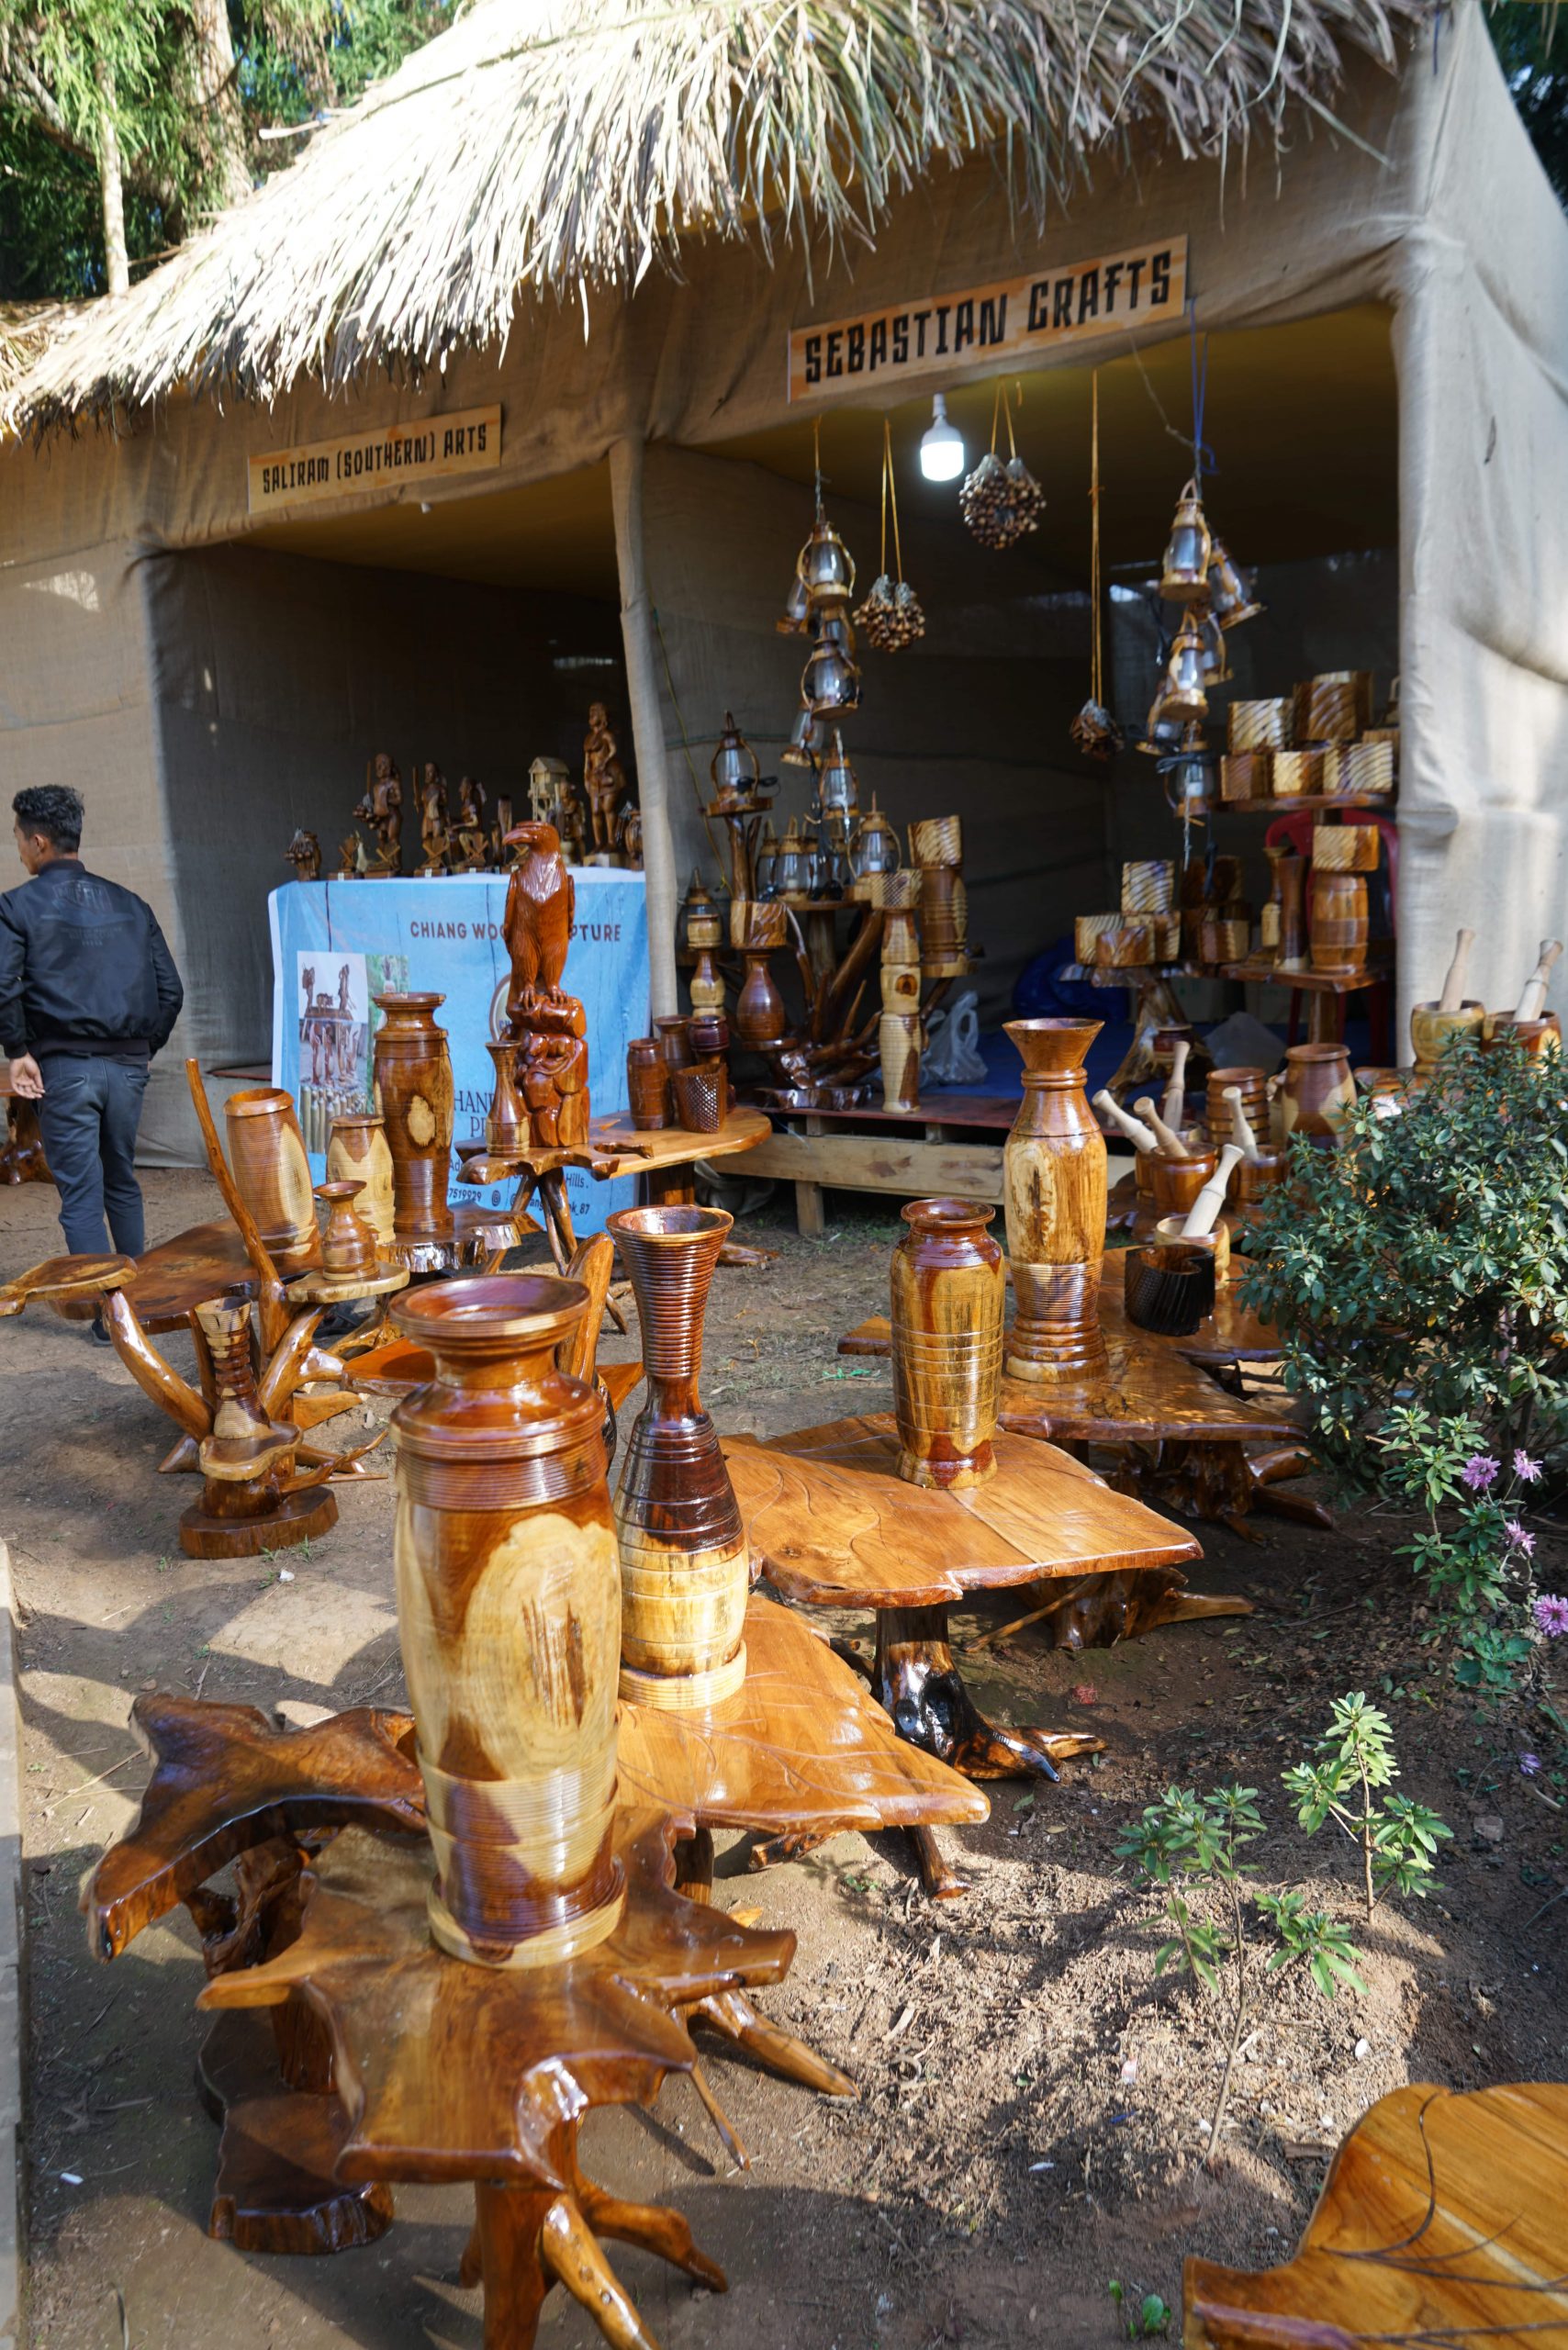 Shopping for Local Handicrafts in Meghalaya India